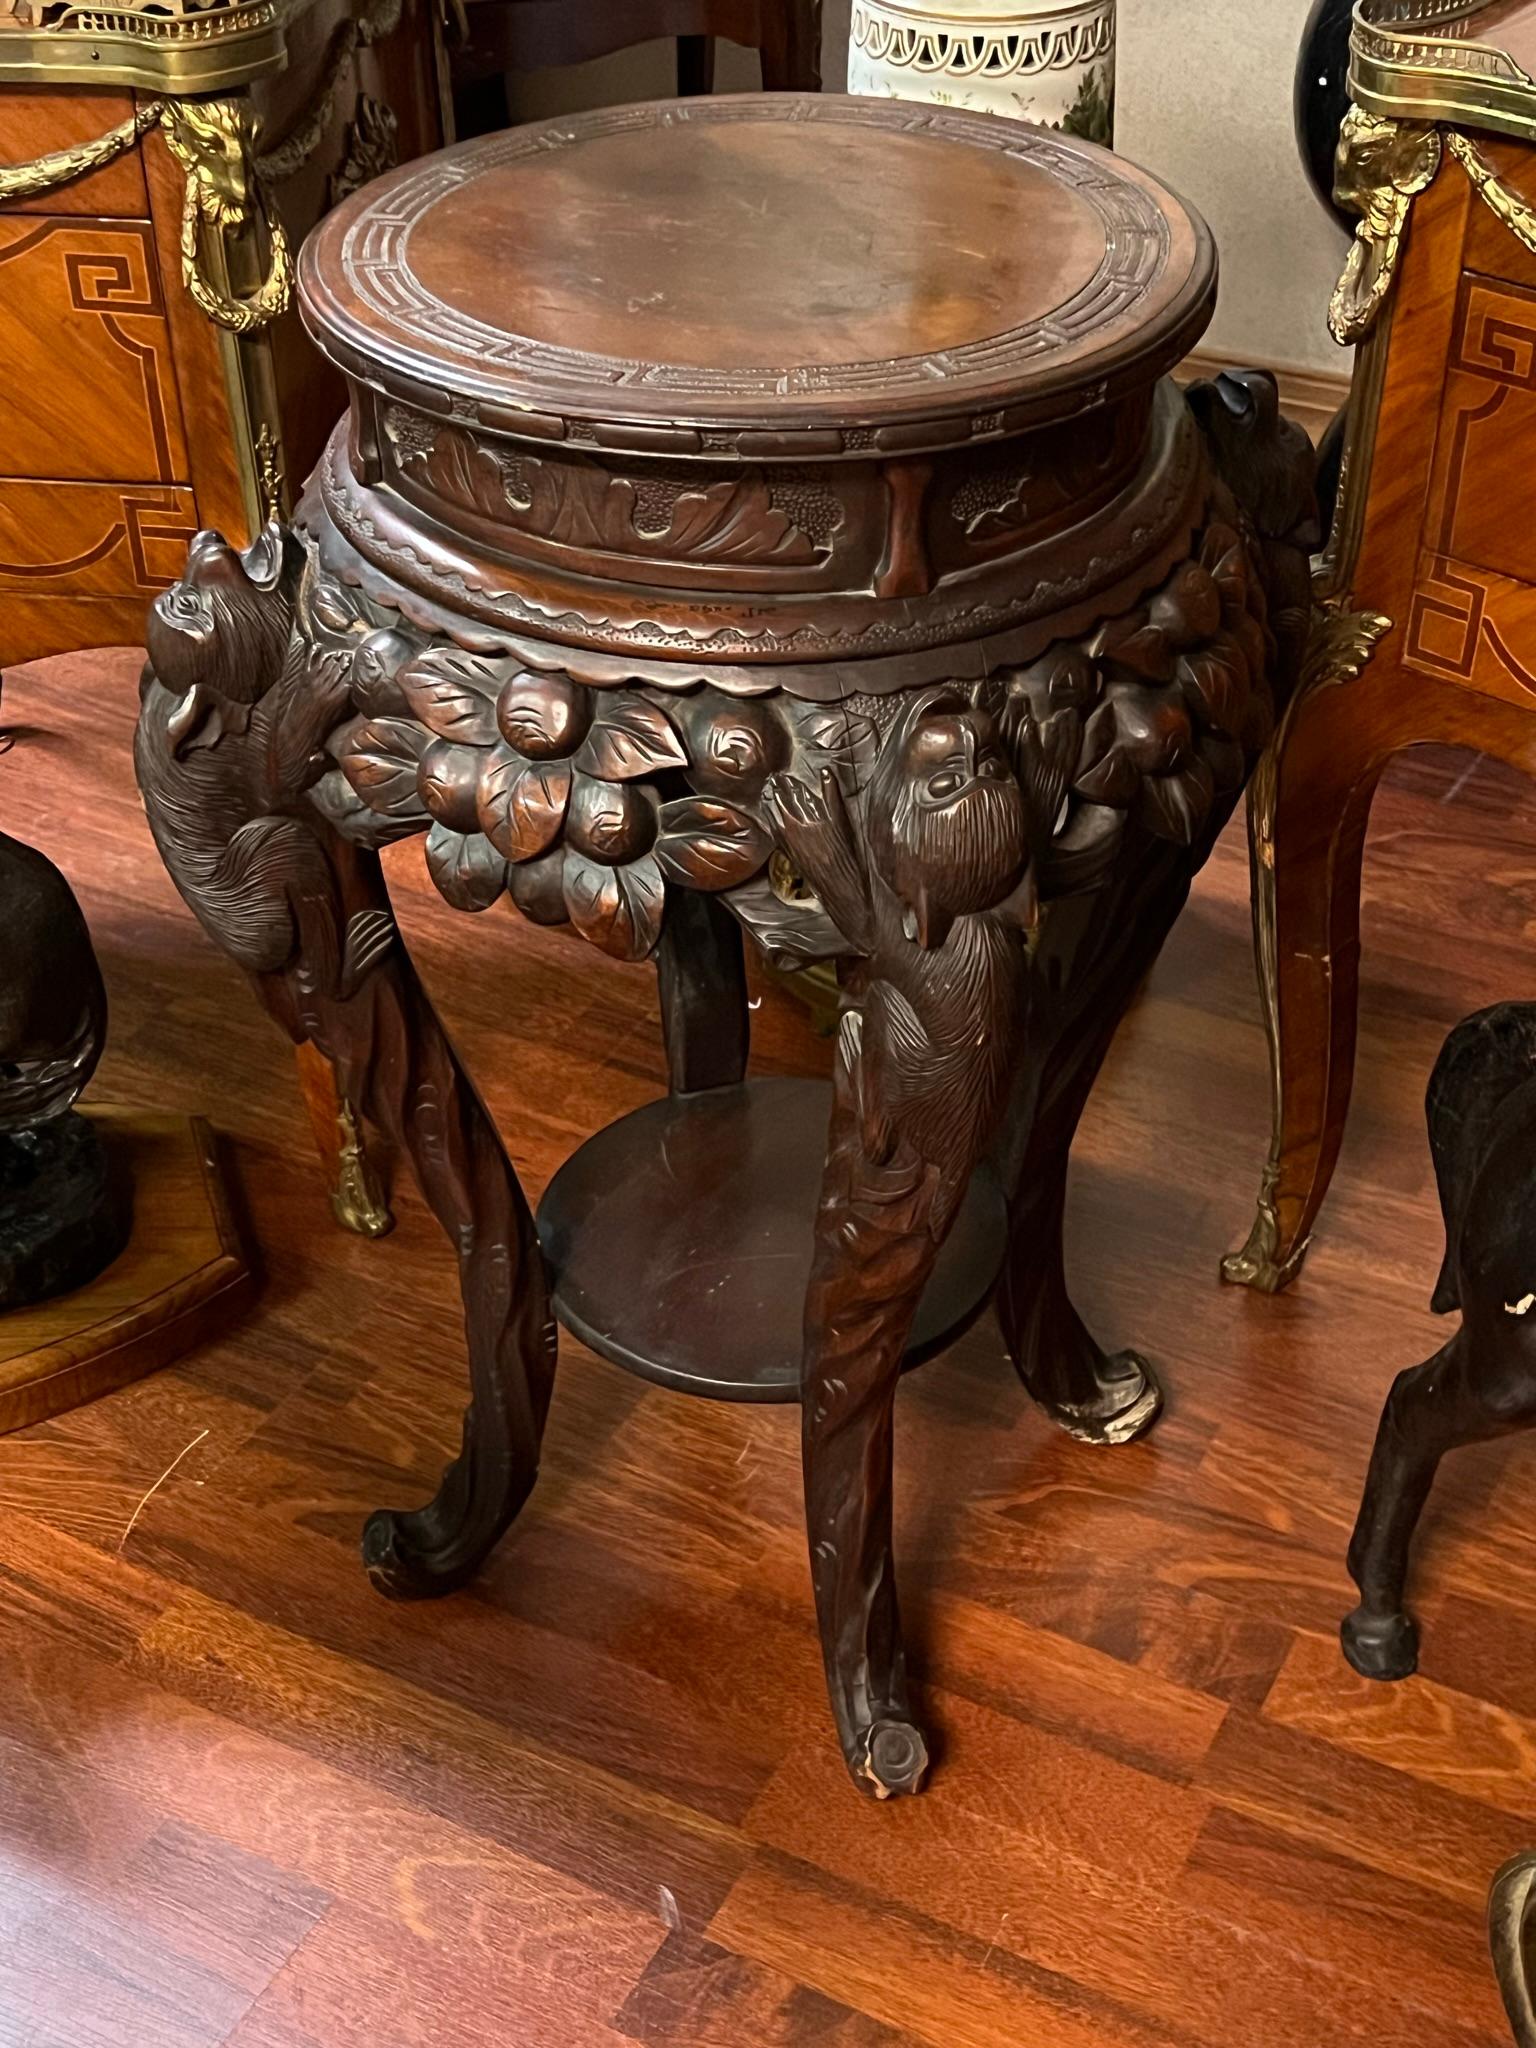 Finely carved antique side table or plant stand depicting monkeys climbing among vines of fruit.  